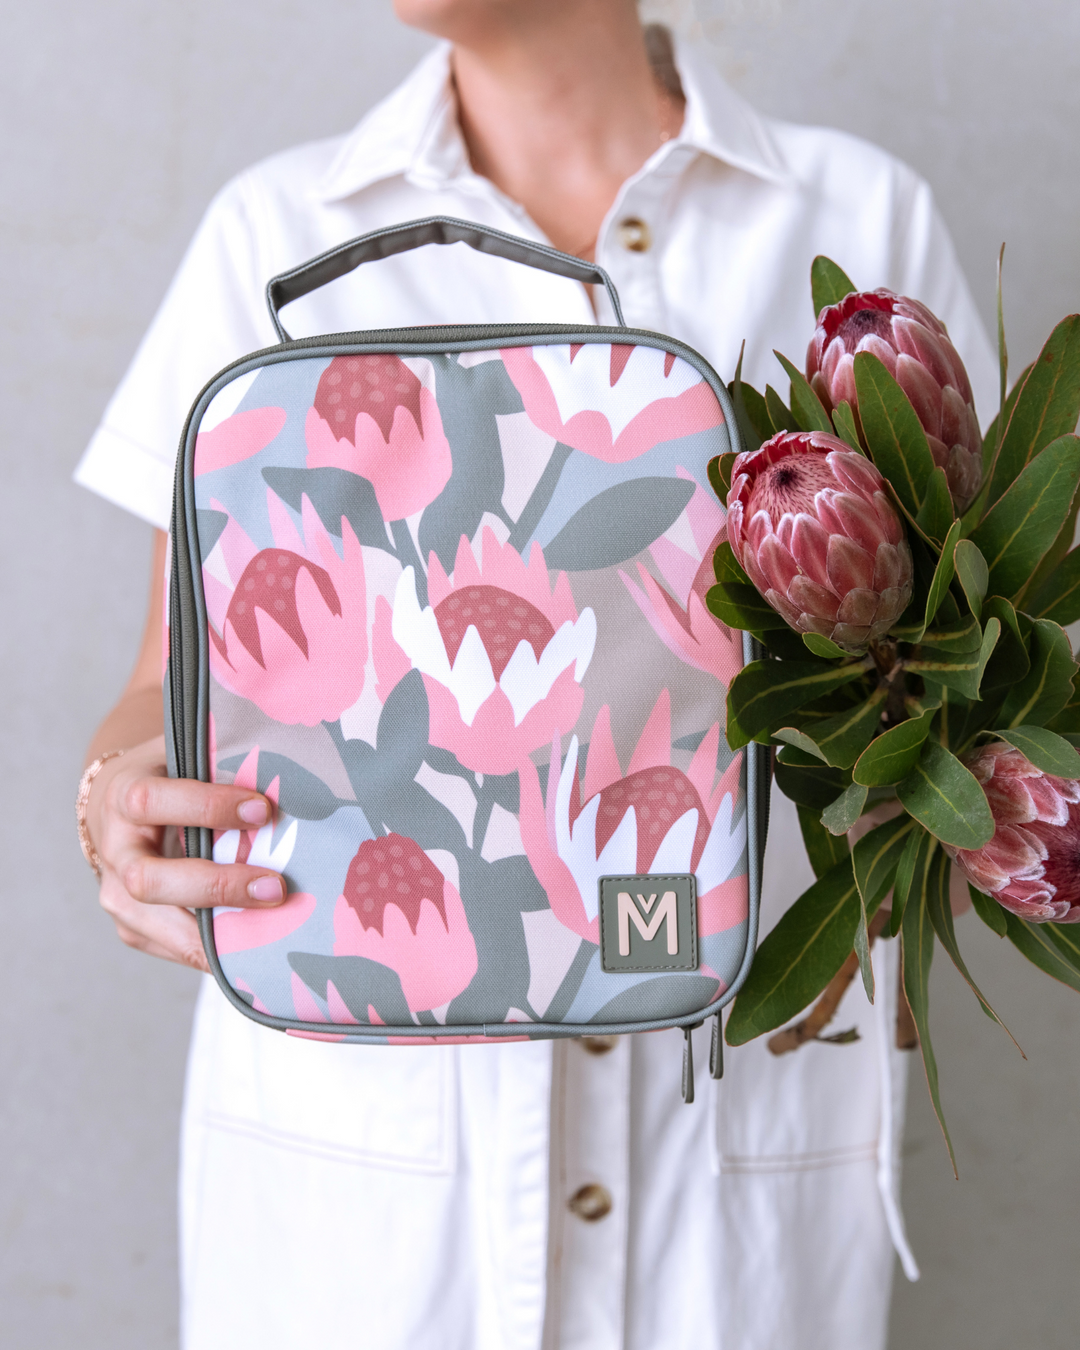 MontiiCo Large Insulated Lunch Bag - Botanica